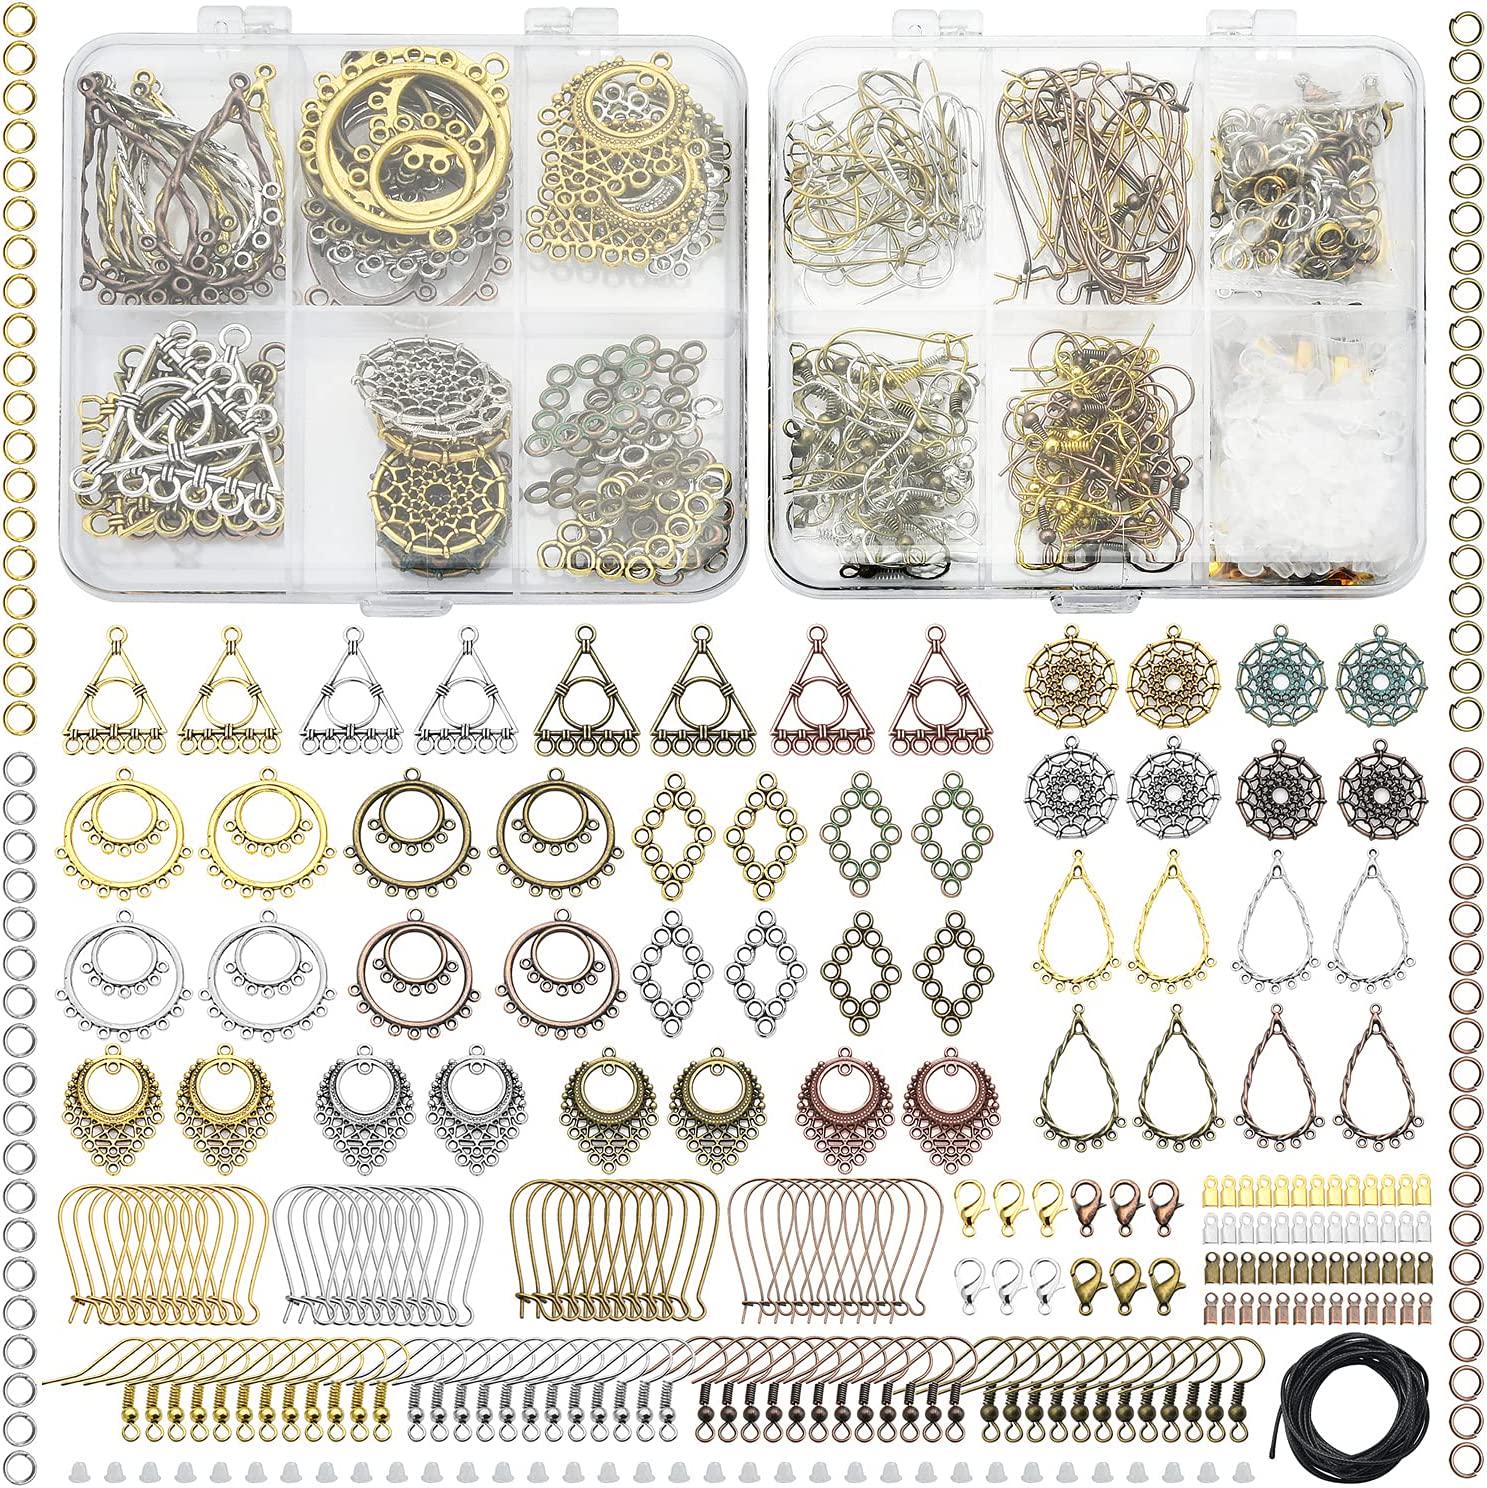 Rired 27, Earring Charms for Jewelry Making Supplies - Earring Making Kit Hypoallergenic, 24 Pair Bohemian Dangle Earring Charms Craft Set, with Earring Findings, String, for DIY, Arts and Crafts, Girl, Gift